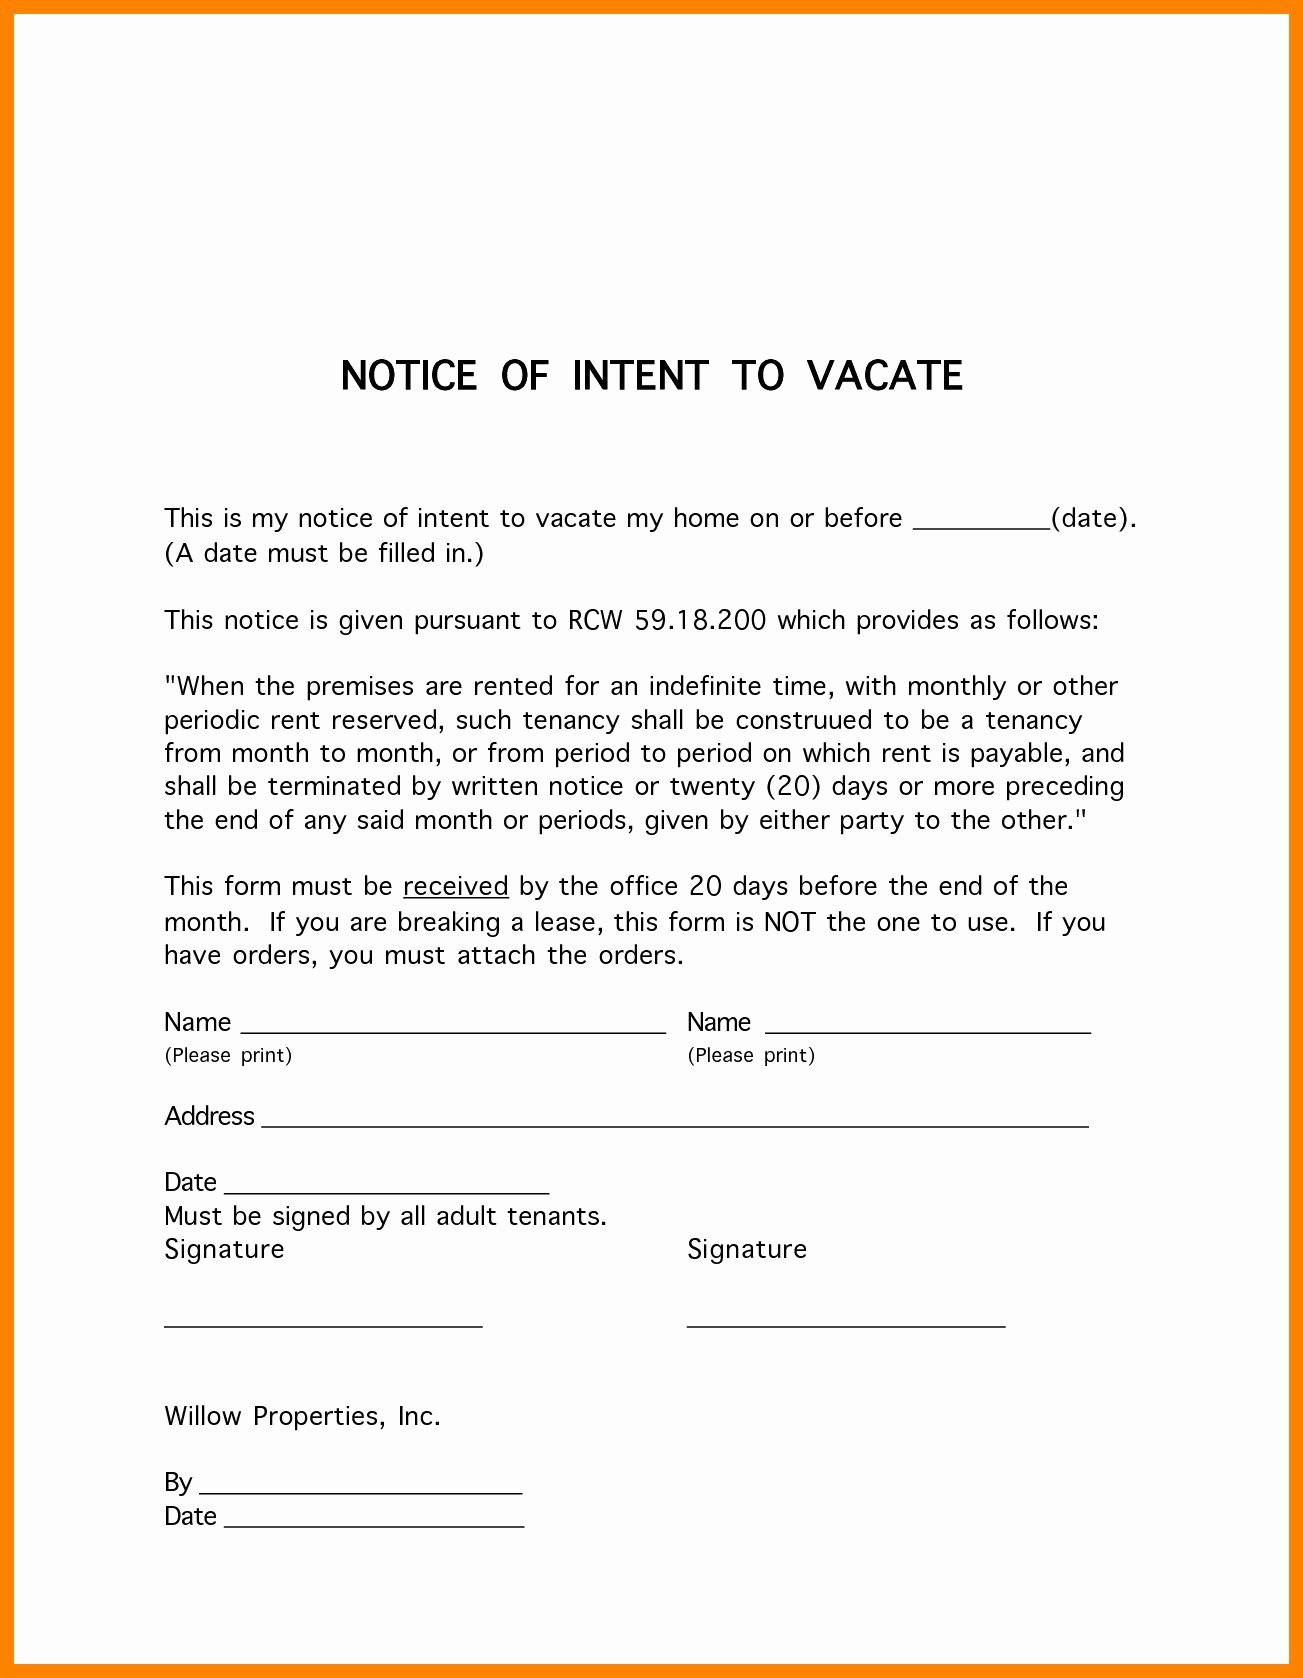 Notice to Vacate Apartment Letter Awesome Notice to Vacate Apartment Letter Template Samples